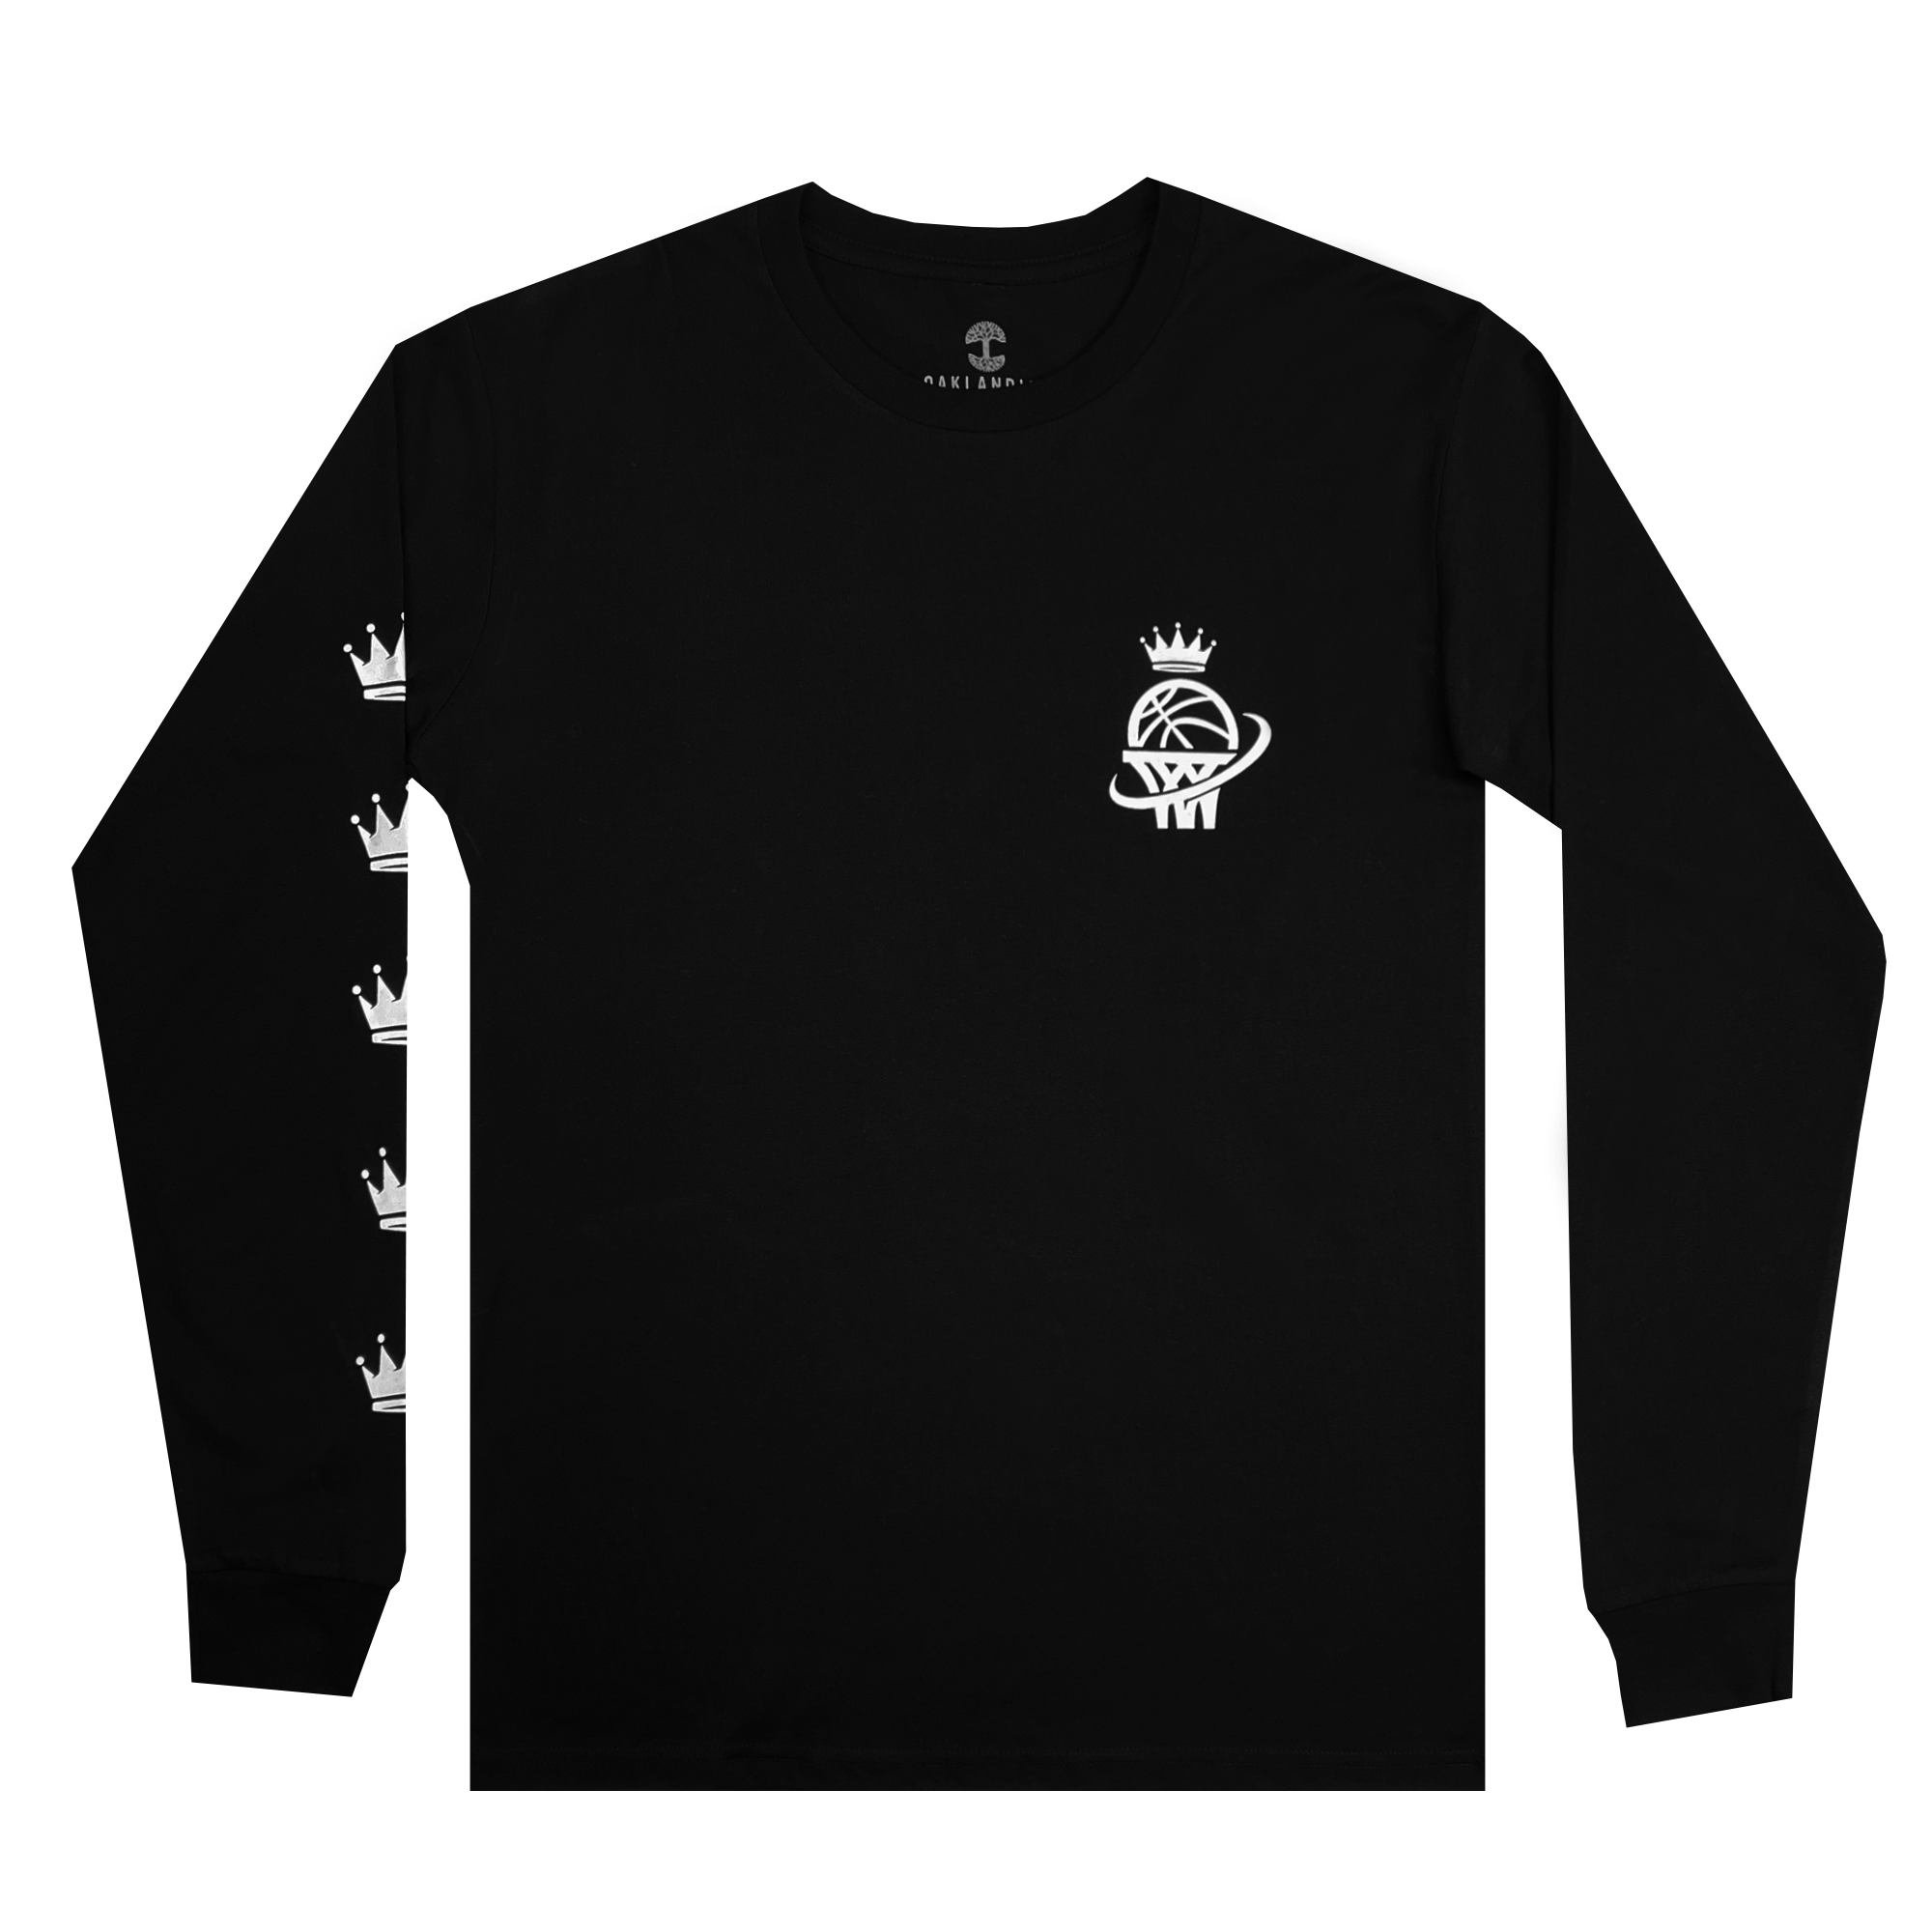 front view of black WPBA long sleeve t-shirt with logo in white on front left chest and crowns along wearer's right sleeve.